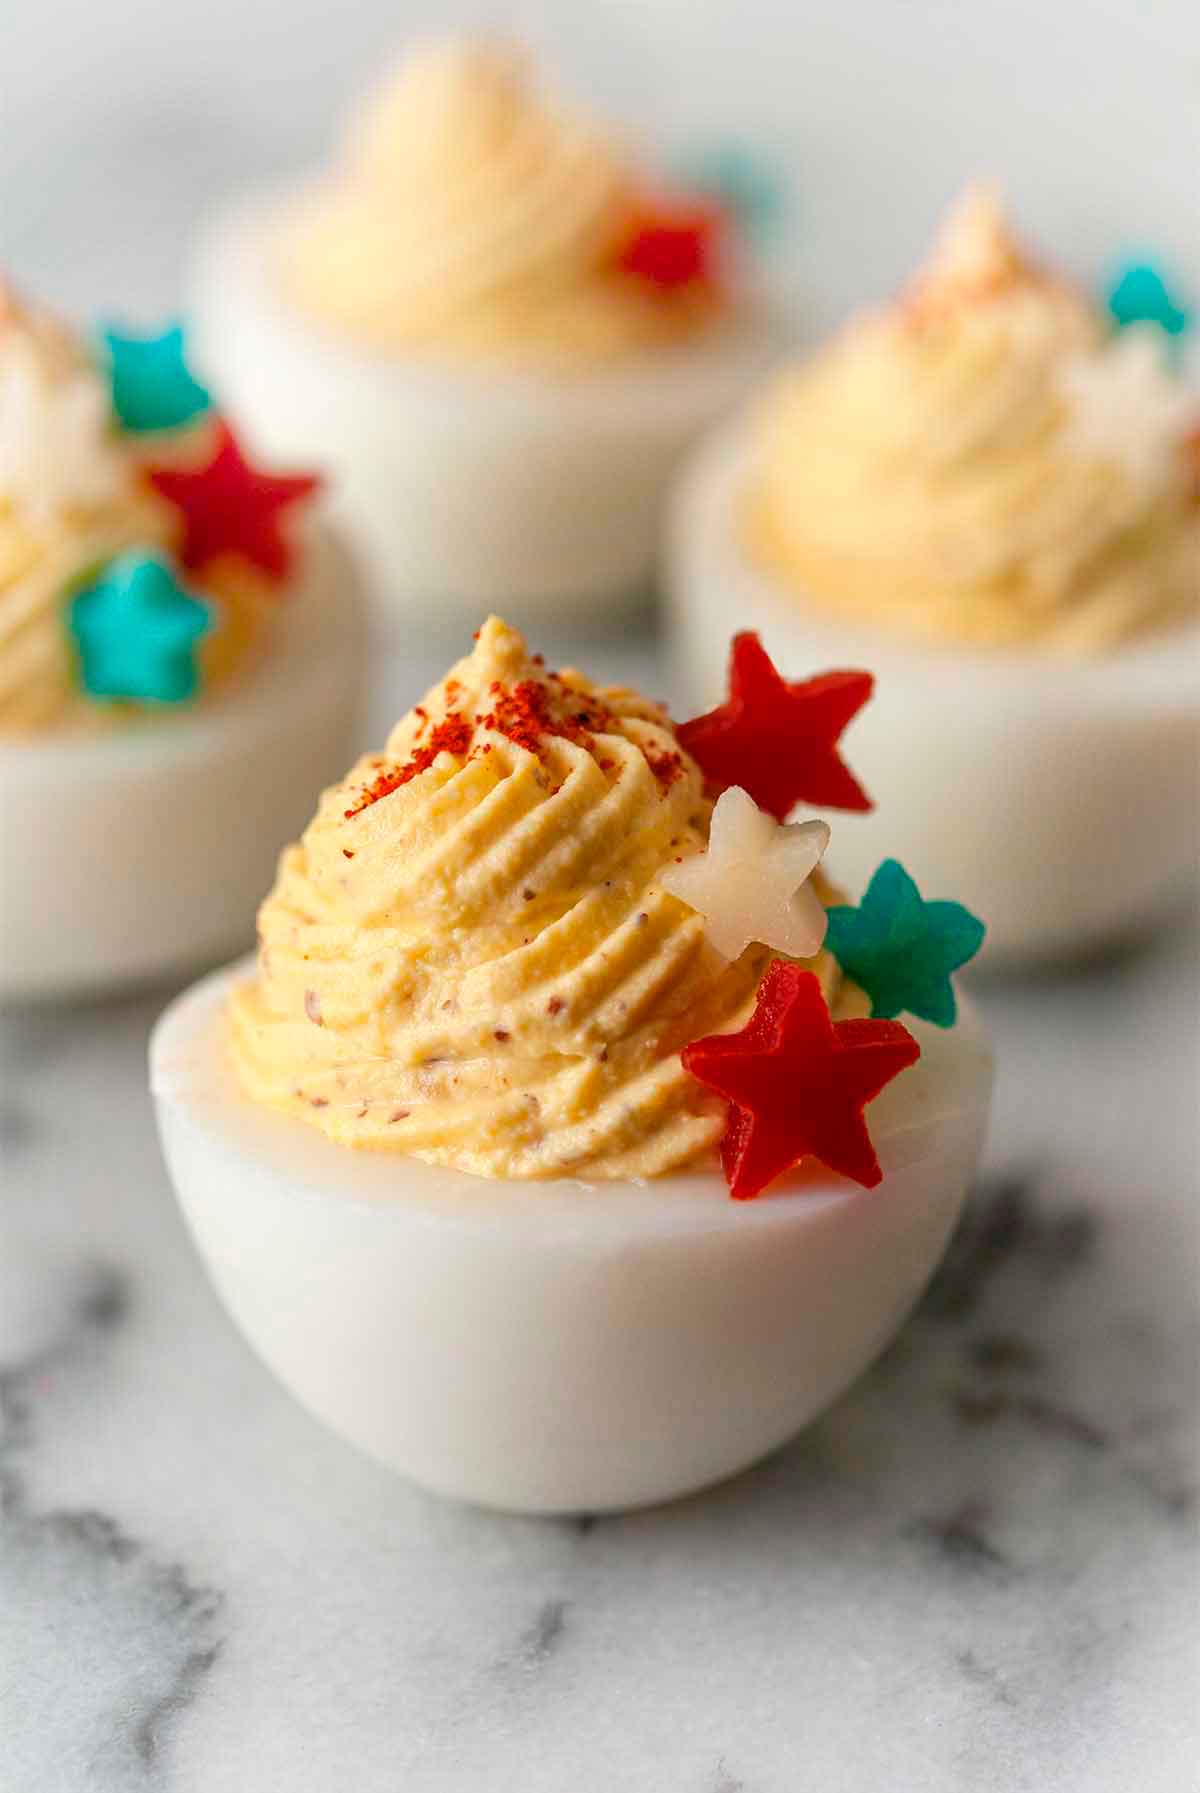 4 deviled eggs on marble, garnished with 4 stars made of red peppers and cheese that's both blue and white.